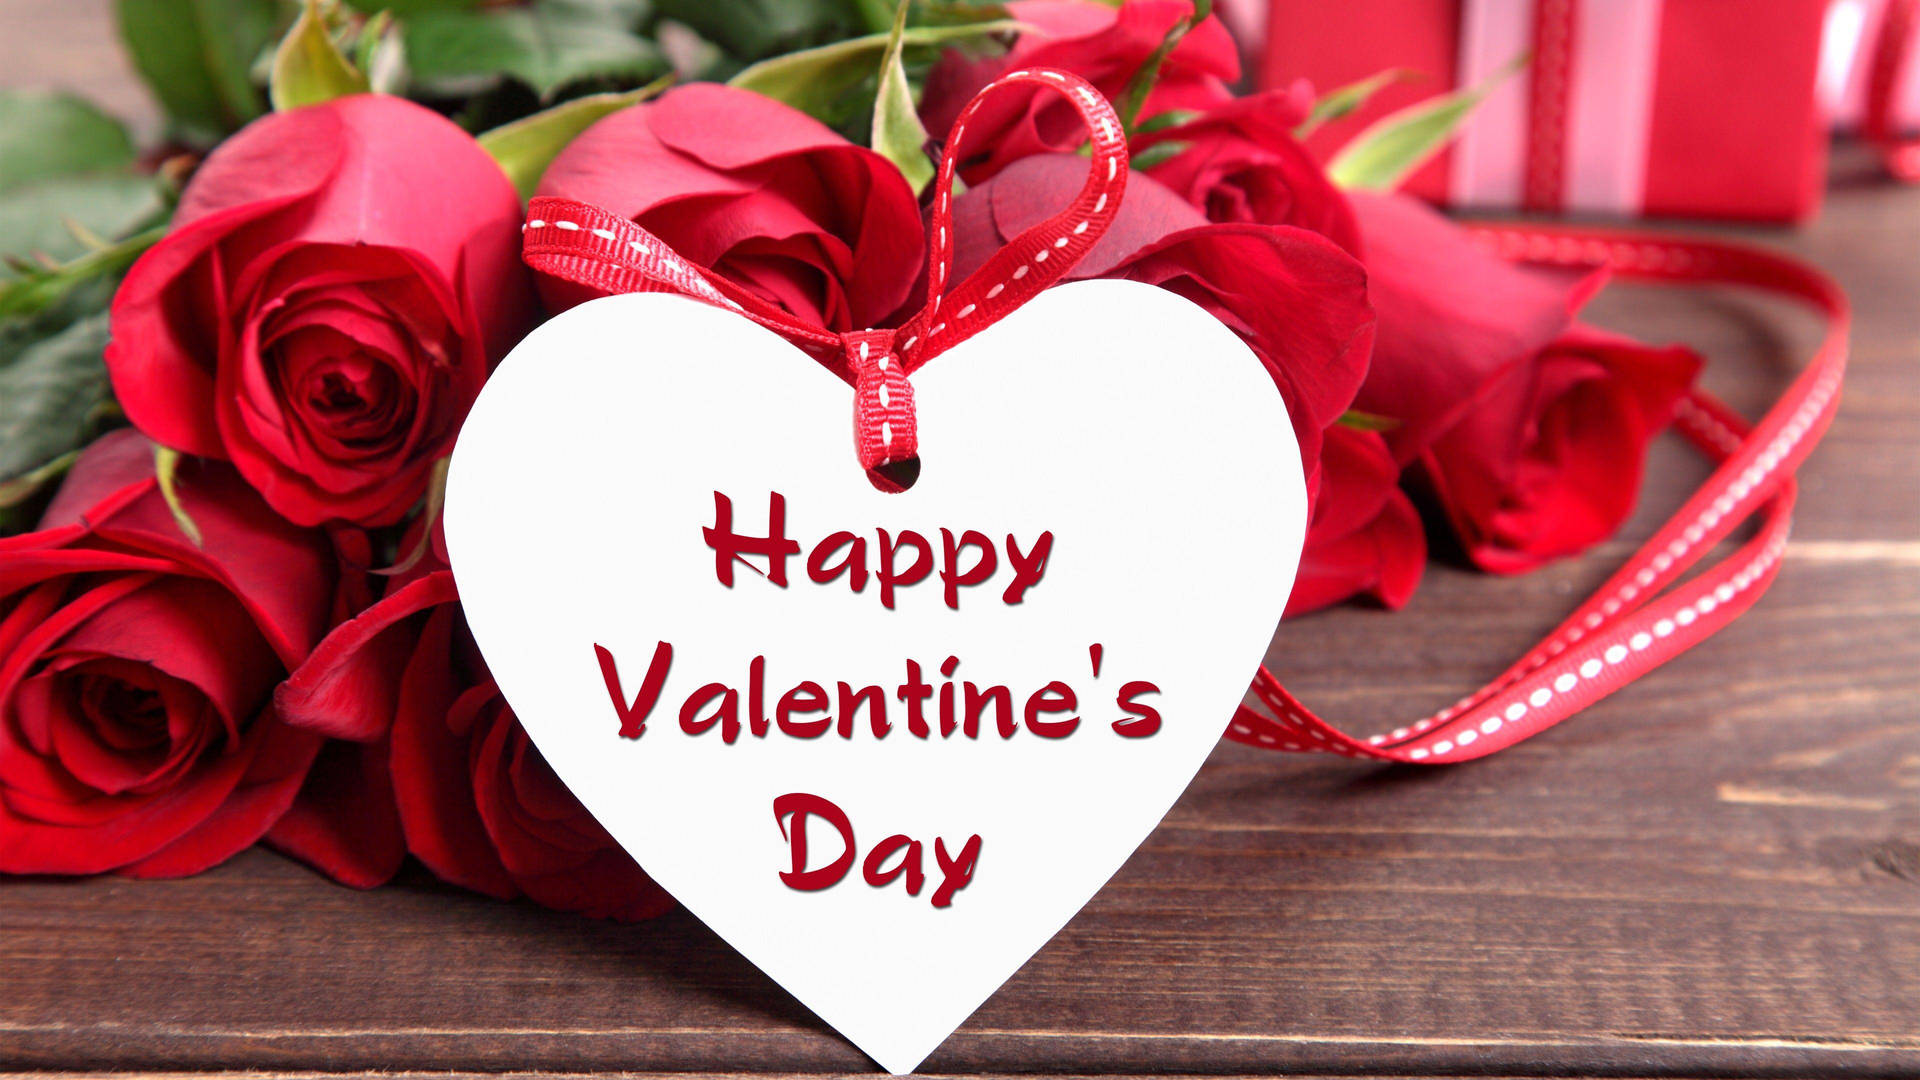 Happy Valentine’s Day Roses And Greeting Card Background